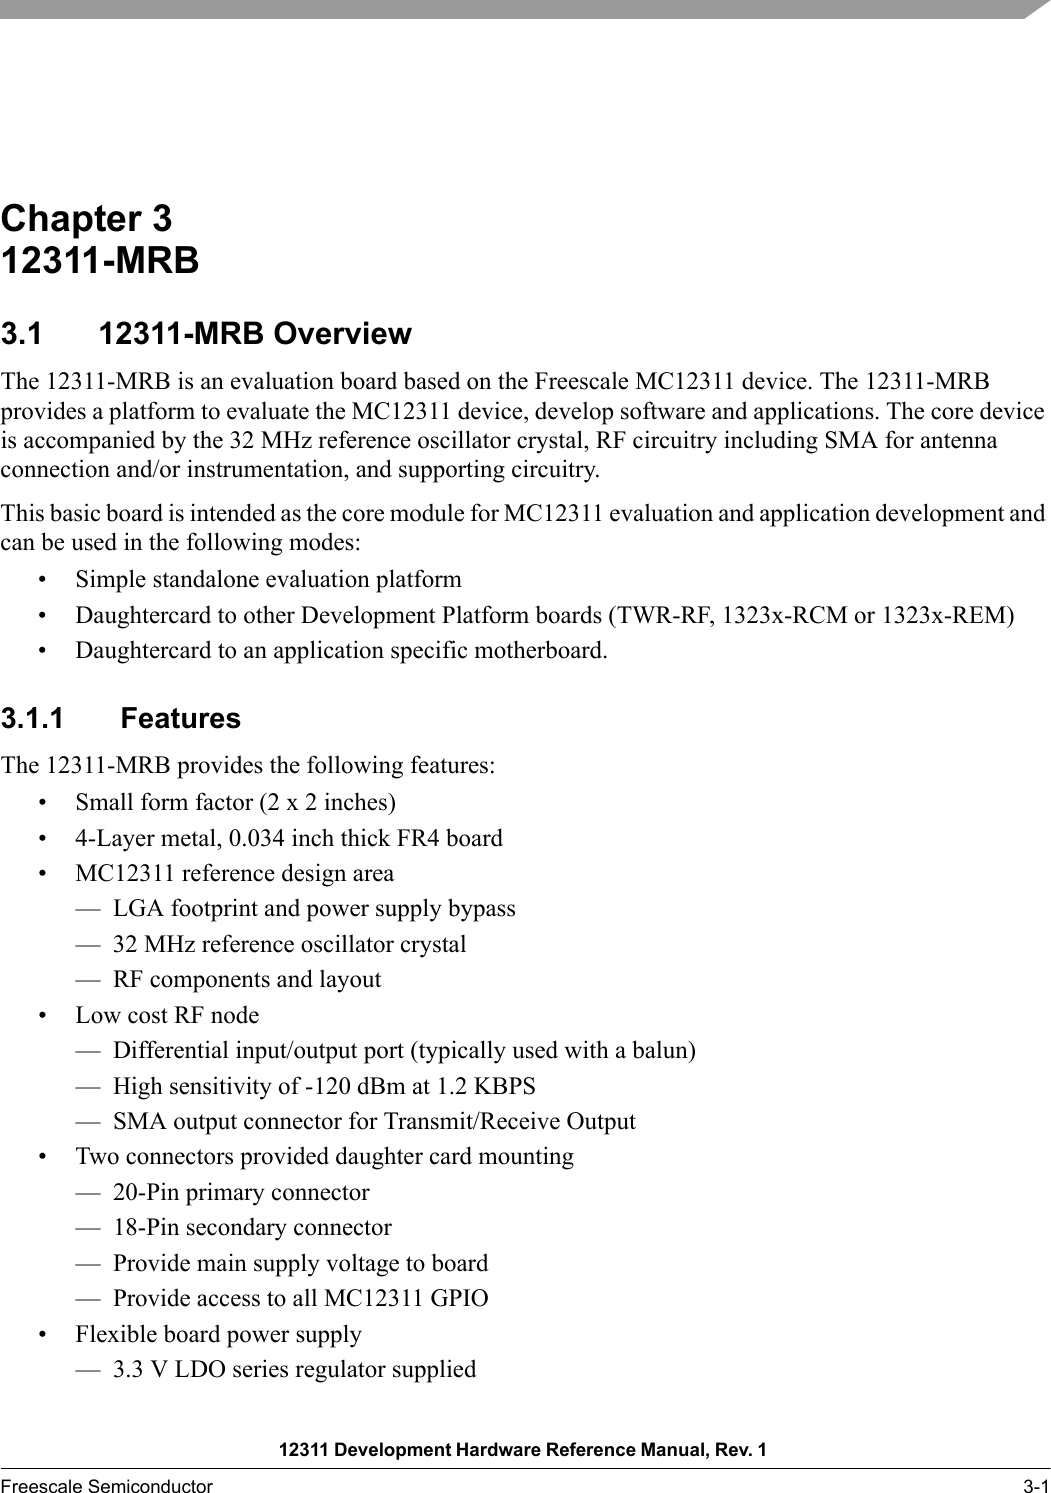 12311 Development Hardware Reference Manual, Rev. 1 Freescale Semiconductor 3-1Chapter 3  12311-MRB3.1 12311-MRB OverviewThe 12311-MRB is an evaluation board based on the Freescale MC12311 device. The 12311-MRB provides a platform to evaluate the MC12311 device, develop software and applications. The core device is accompanied by the 32 MHz reference oscillator crystal, RF circuitry including SMA for antenna connection and/or instrumentation, and supporting circuitry. This basic board is intended as the core module for MC12311 evaluation and application development and can be used in the following modes:• Simple standalone evaluation platform• Daughtercard to other Development Platform boards (TWR-RF, 1323x-RCM or 1323x-REM)• Daughtercard to an application specific motherboard.3.1.1 FeaturesThe 12311-MRB provides the following features:• Small form factor (2 x 2 inches)• 4-Layer metal, 0.034 inch thick FR4 board• MC12311 reference design area— LGA footprint and power supply bypass— 32 MHz reference oscillator crystal— RF components and layout• Low cost RF node— Differential input/output port (typically used with a balun)— High sensitivity of -120 dBm at 1.2 KBPS— SMA output connector for Transmit/Receive Output• Two connectors provided daughter card mounting— 20-Pin primary connector— 18-Pin secondary connector— Provide main supply voltage to board— Provide access to all MC12311 GPIO• Flexible board power supply— 3.3 V LDO series regulator supplied